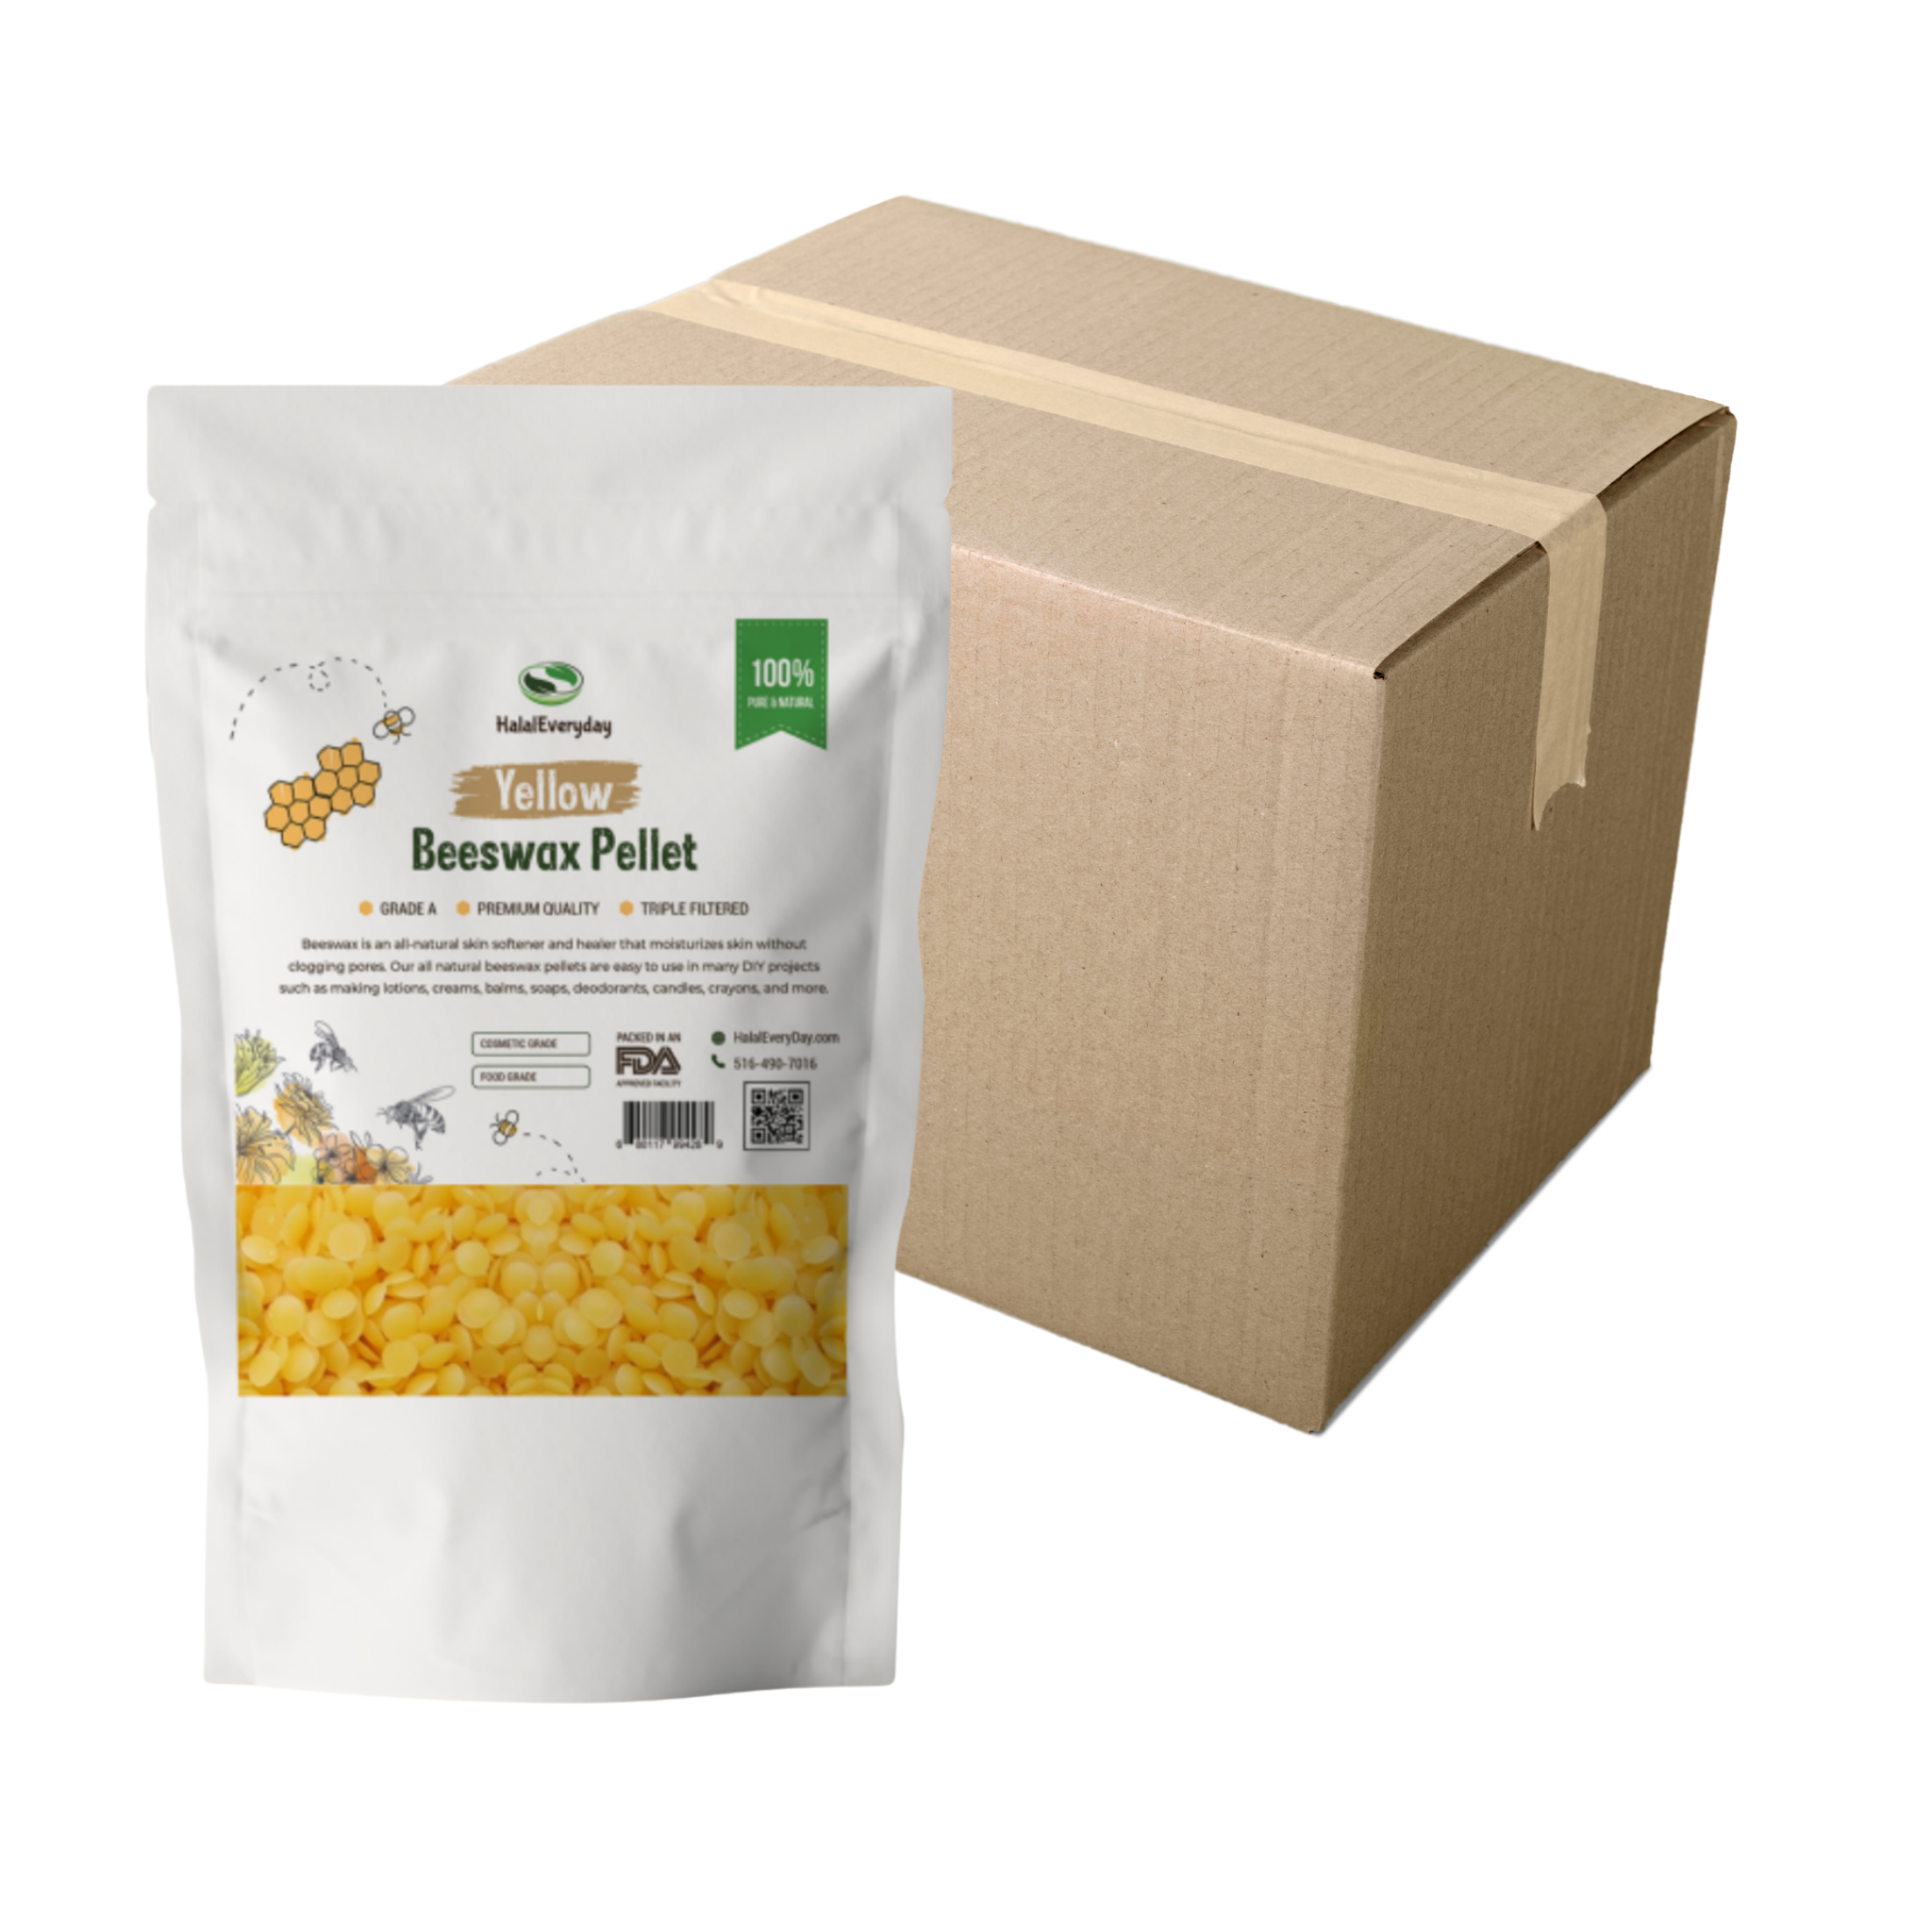 Yellow Beeswax Pellets 100% Pure Natural Made in USA for 